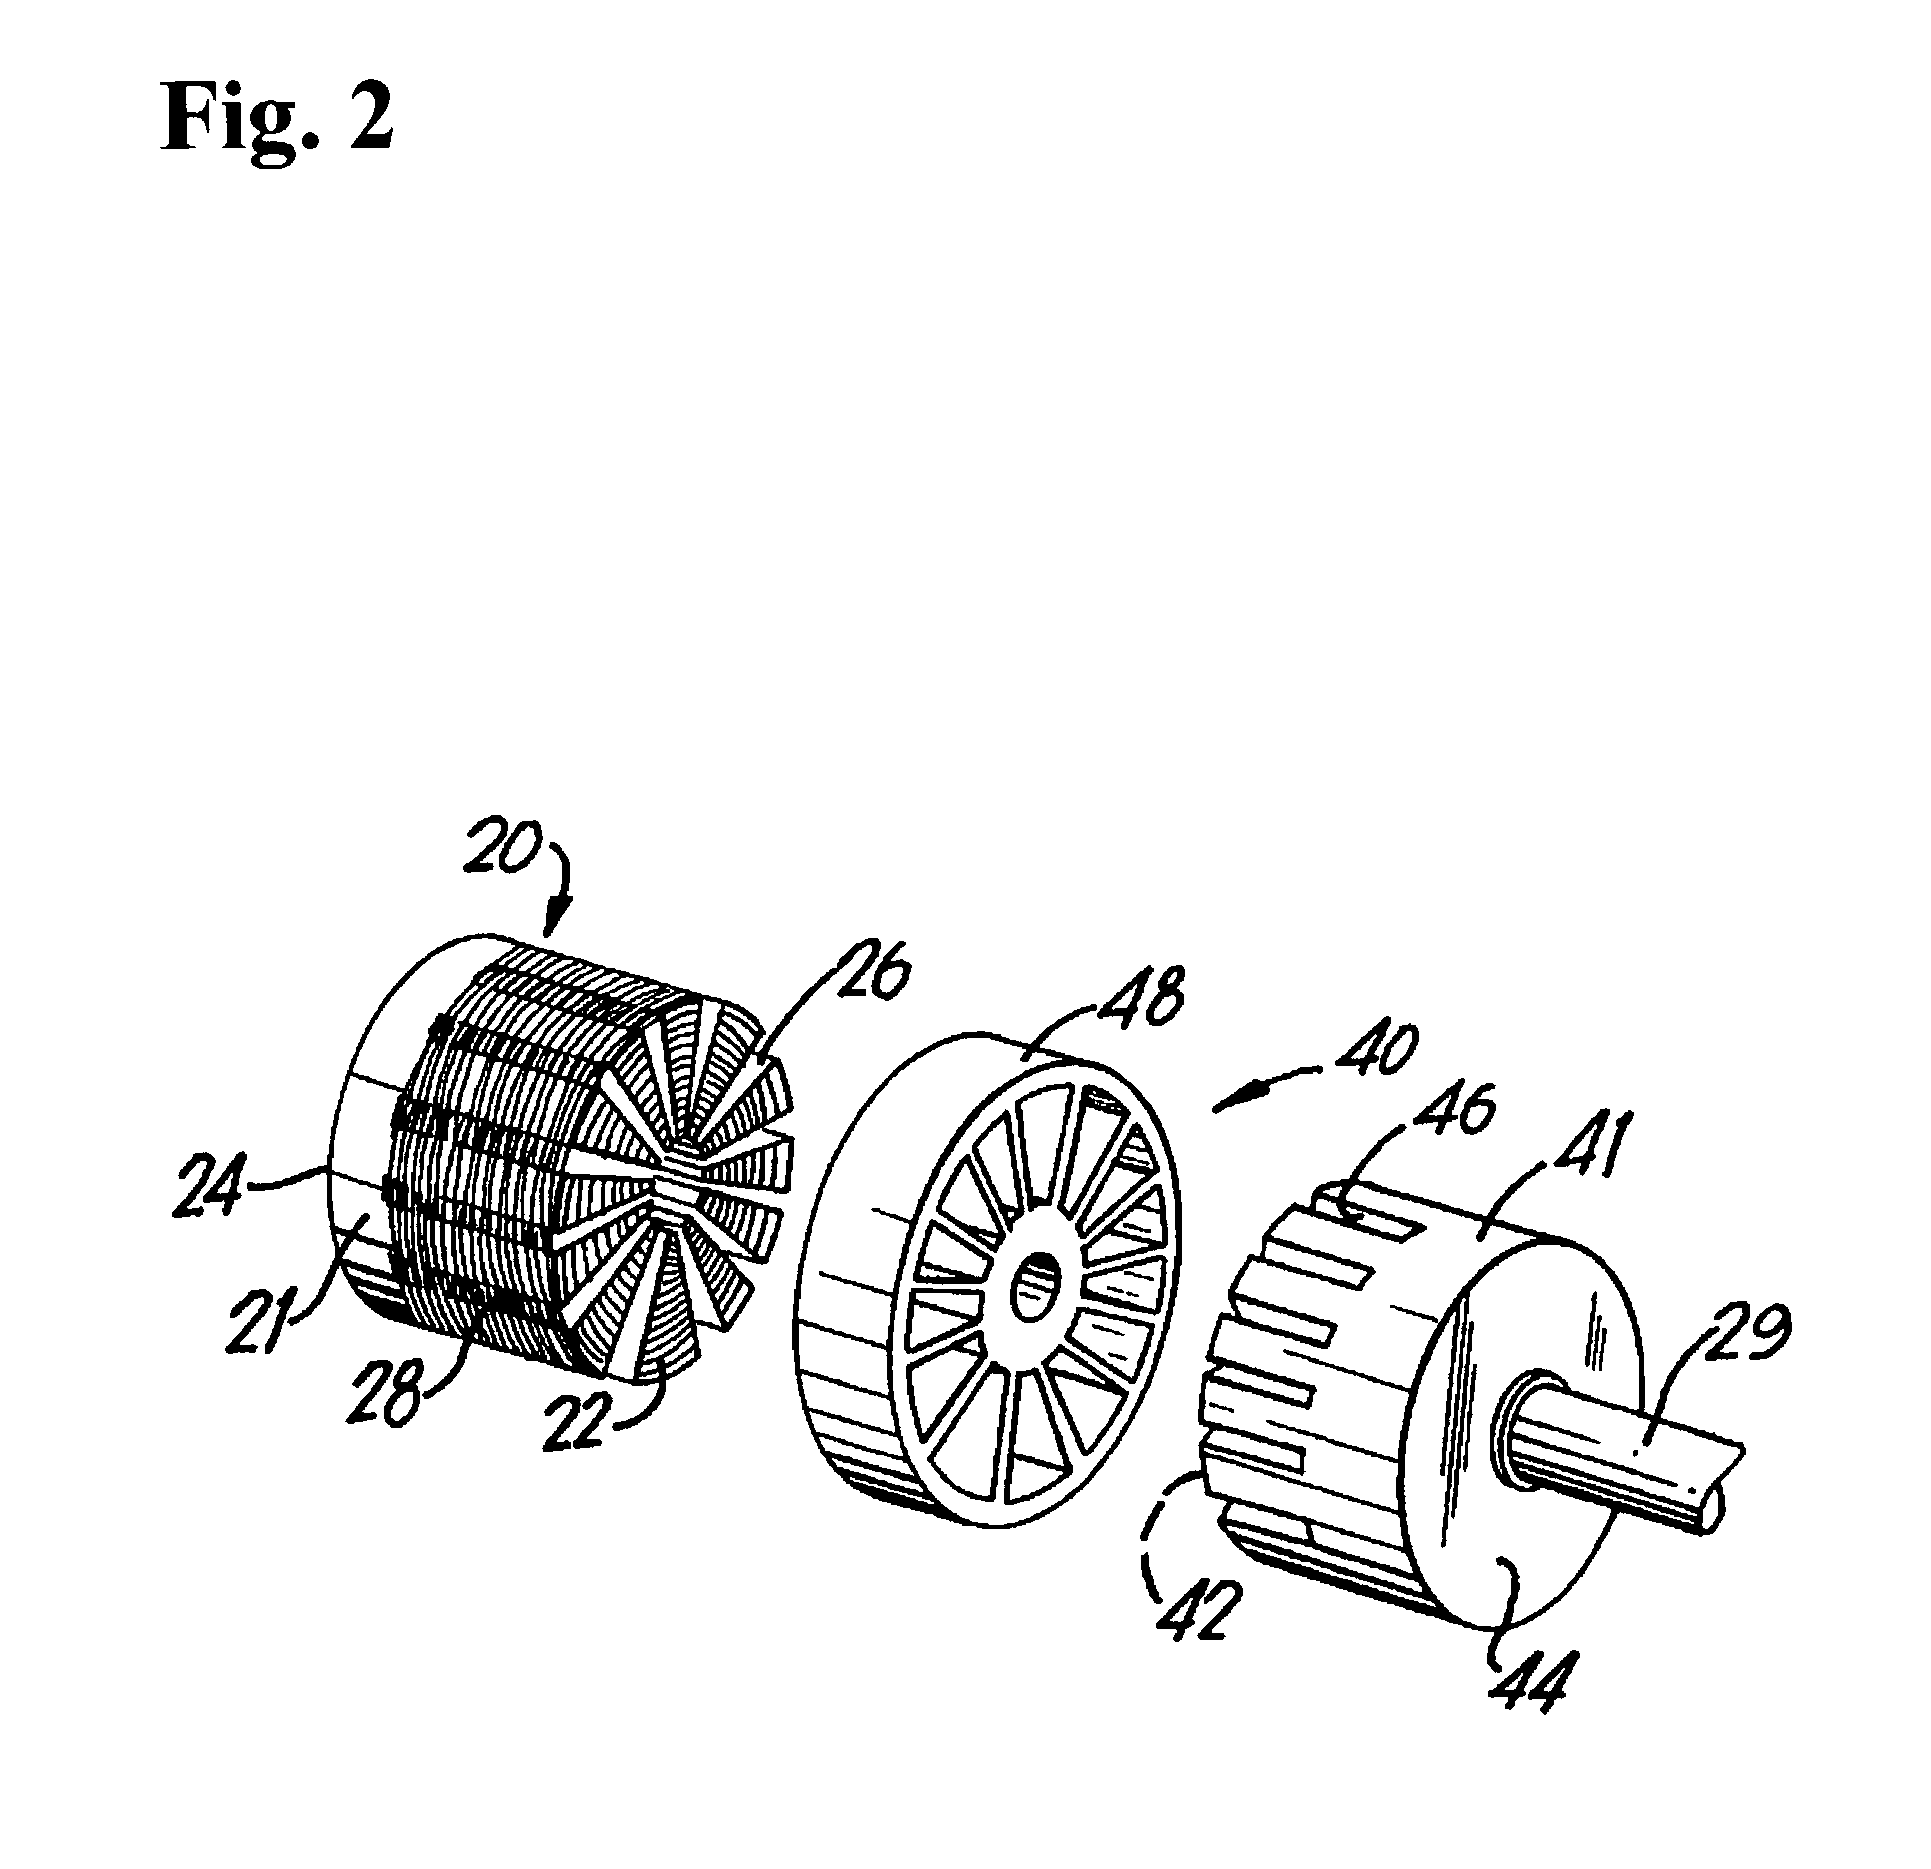 Method of constructing a unitary amorphous metal component for an electric machine